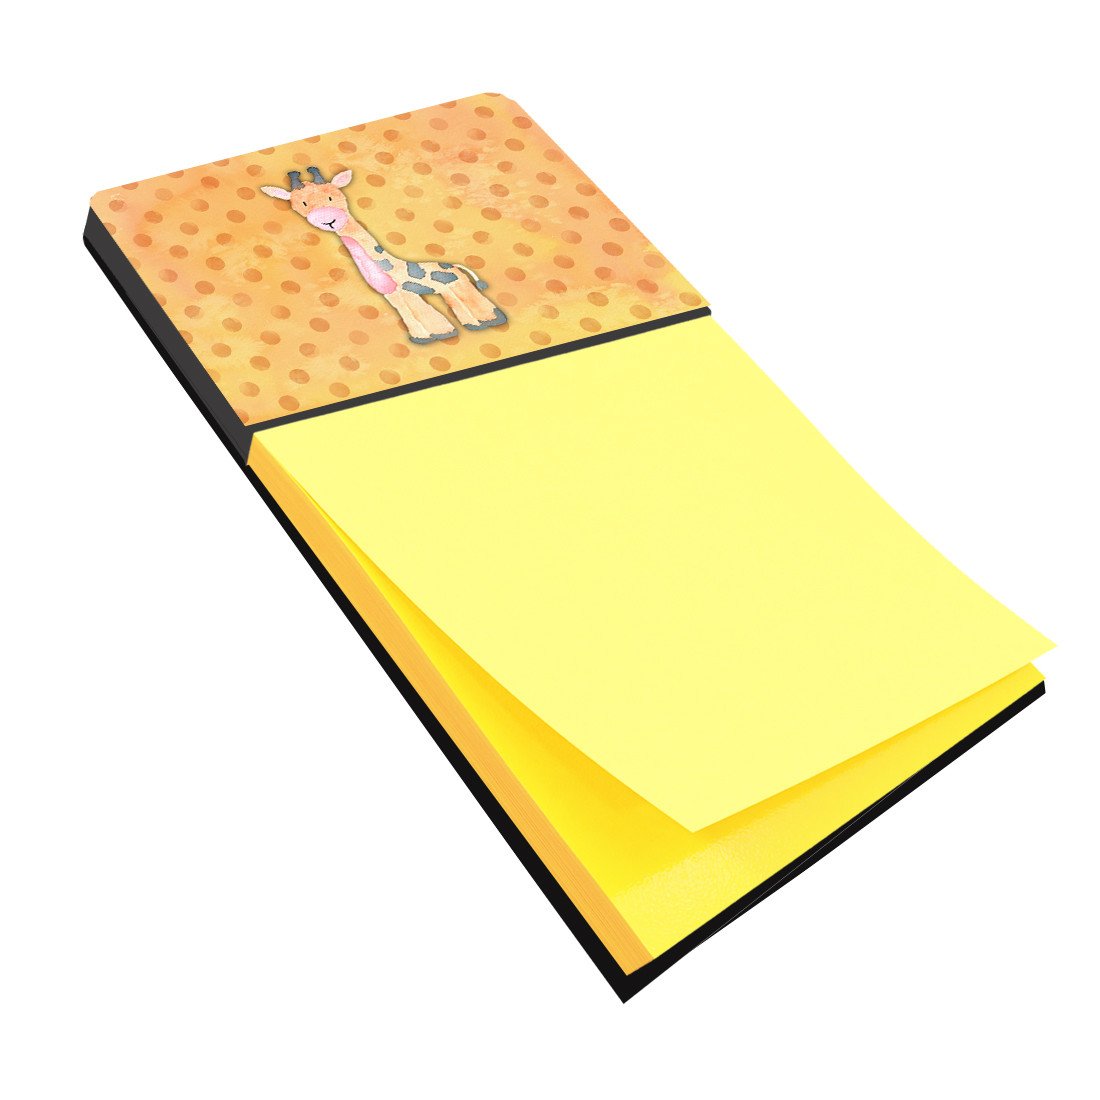 Polkadot Griaffe Watercolor Sticky Note Holder BB7373SN by Caroline's Treasures